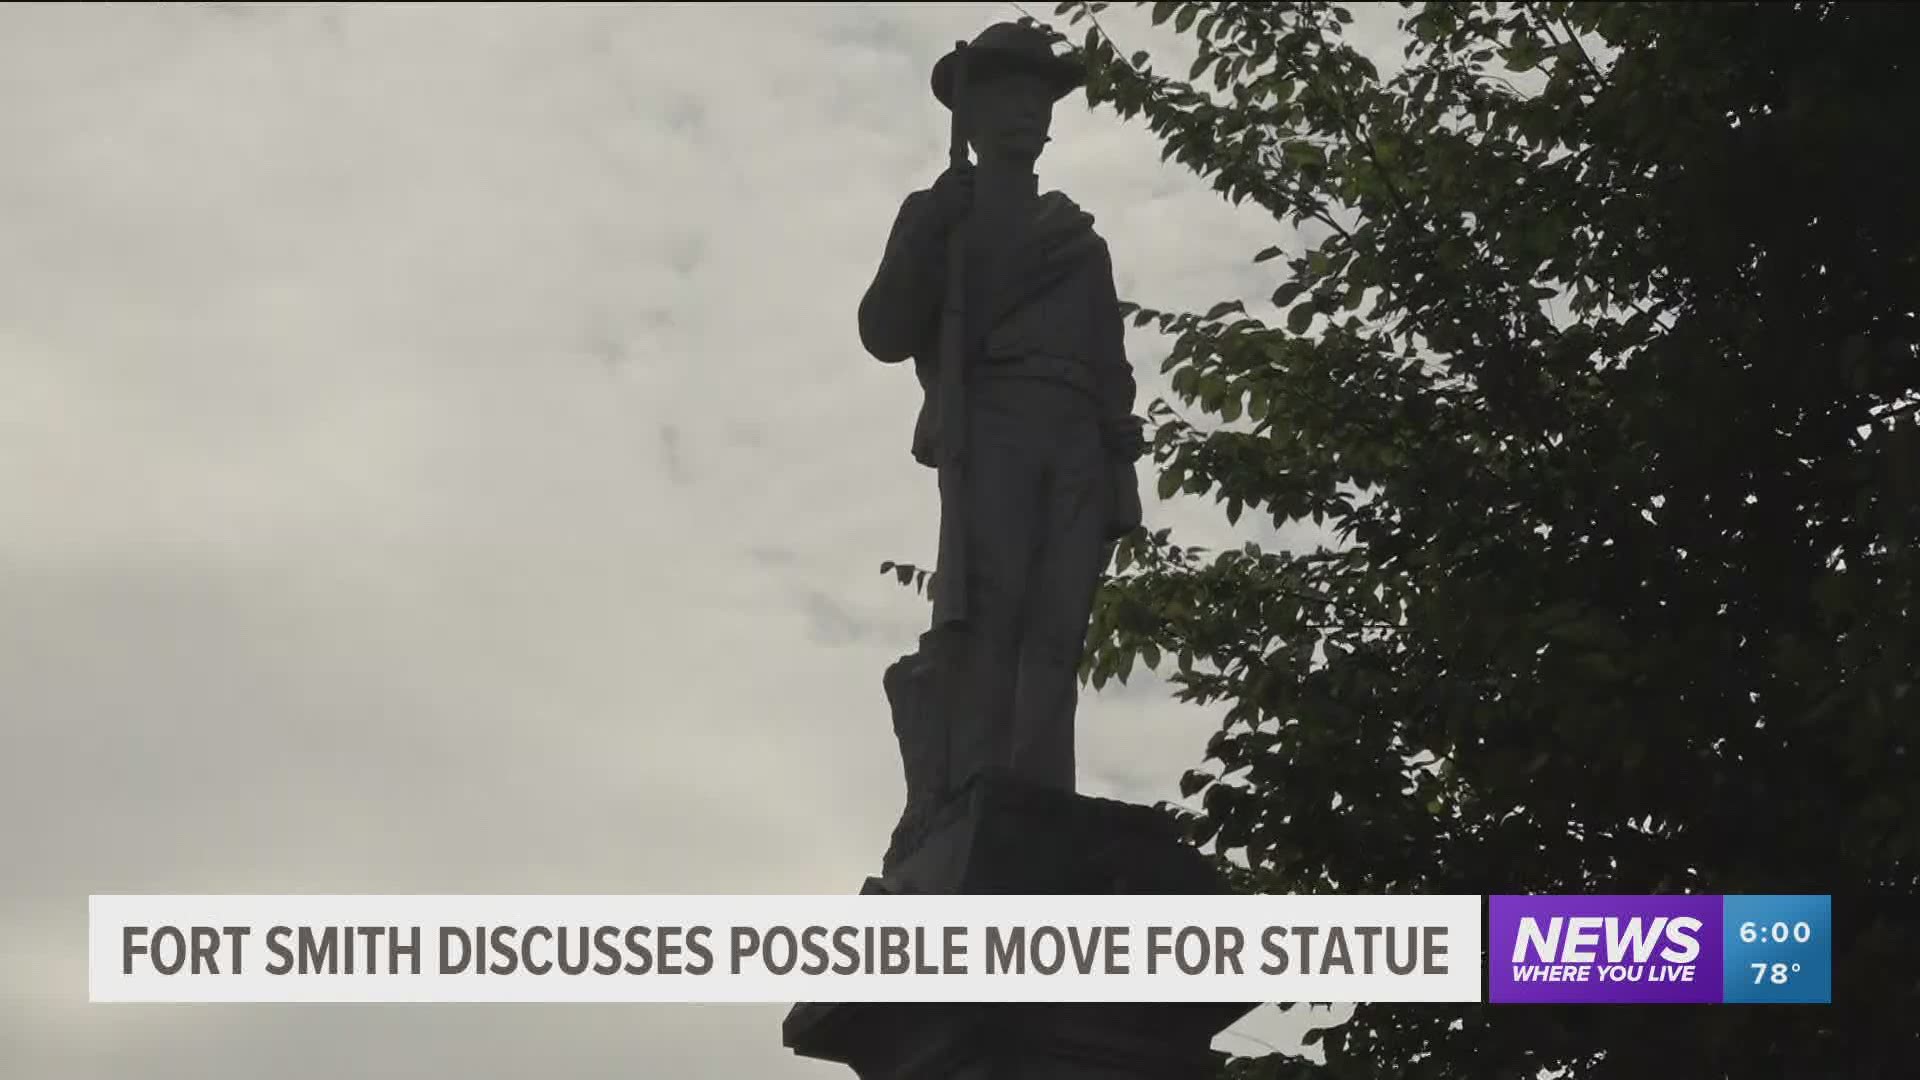 Fort Smith Discusses Possible Move for Confederate Statue